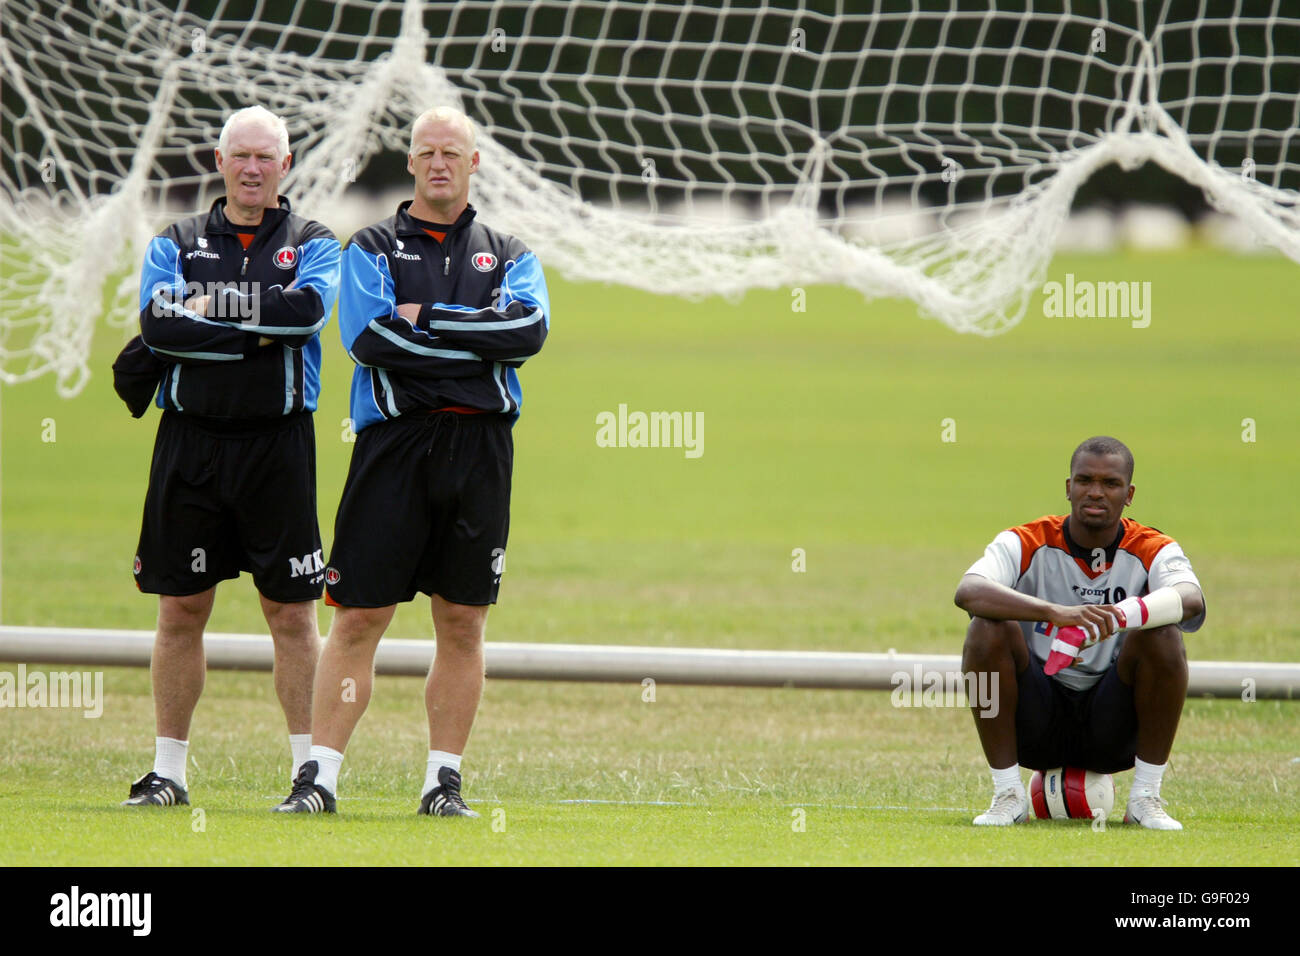 Soccer - FA Barclays Premiership - Charlton Athletic Training - Sparrows Lane. Charlton Athletic goalkeeping coach Mike Kelly (l) manager Iain Dowie and Darren Bent (r) watch over training Stock Photo